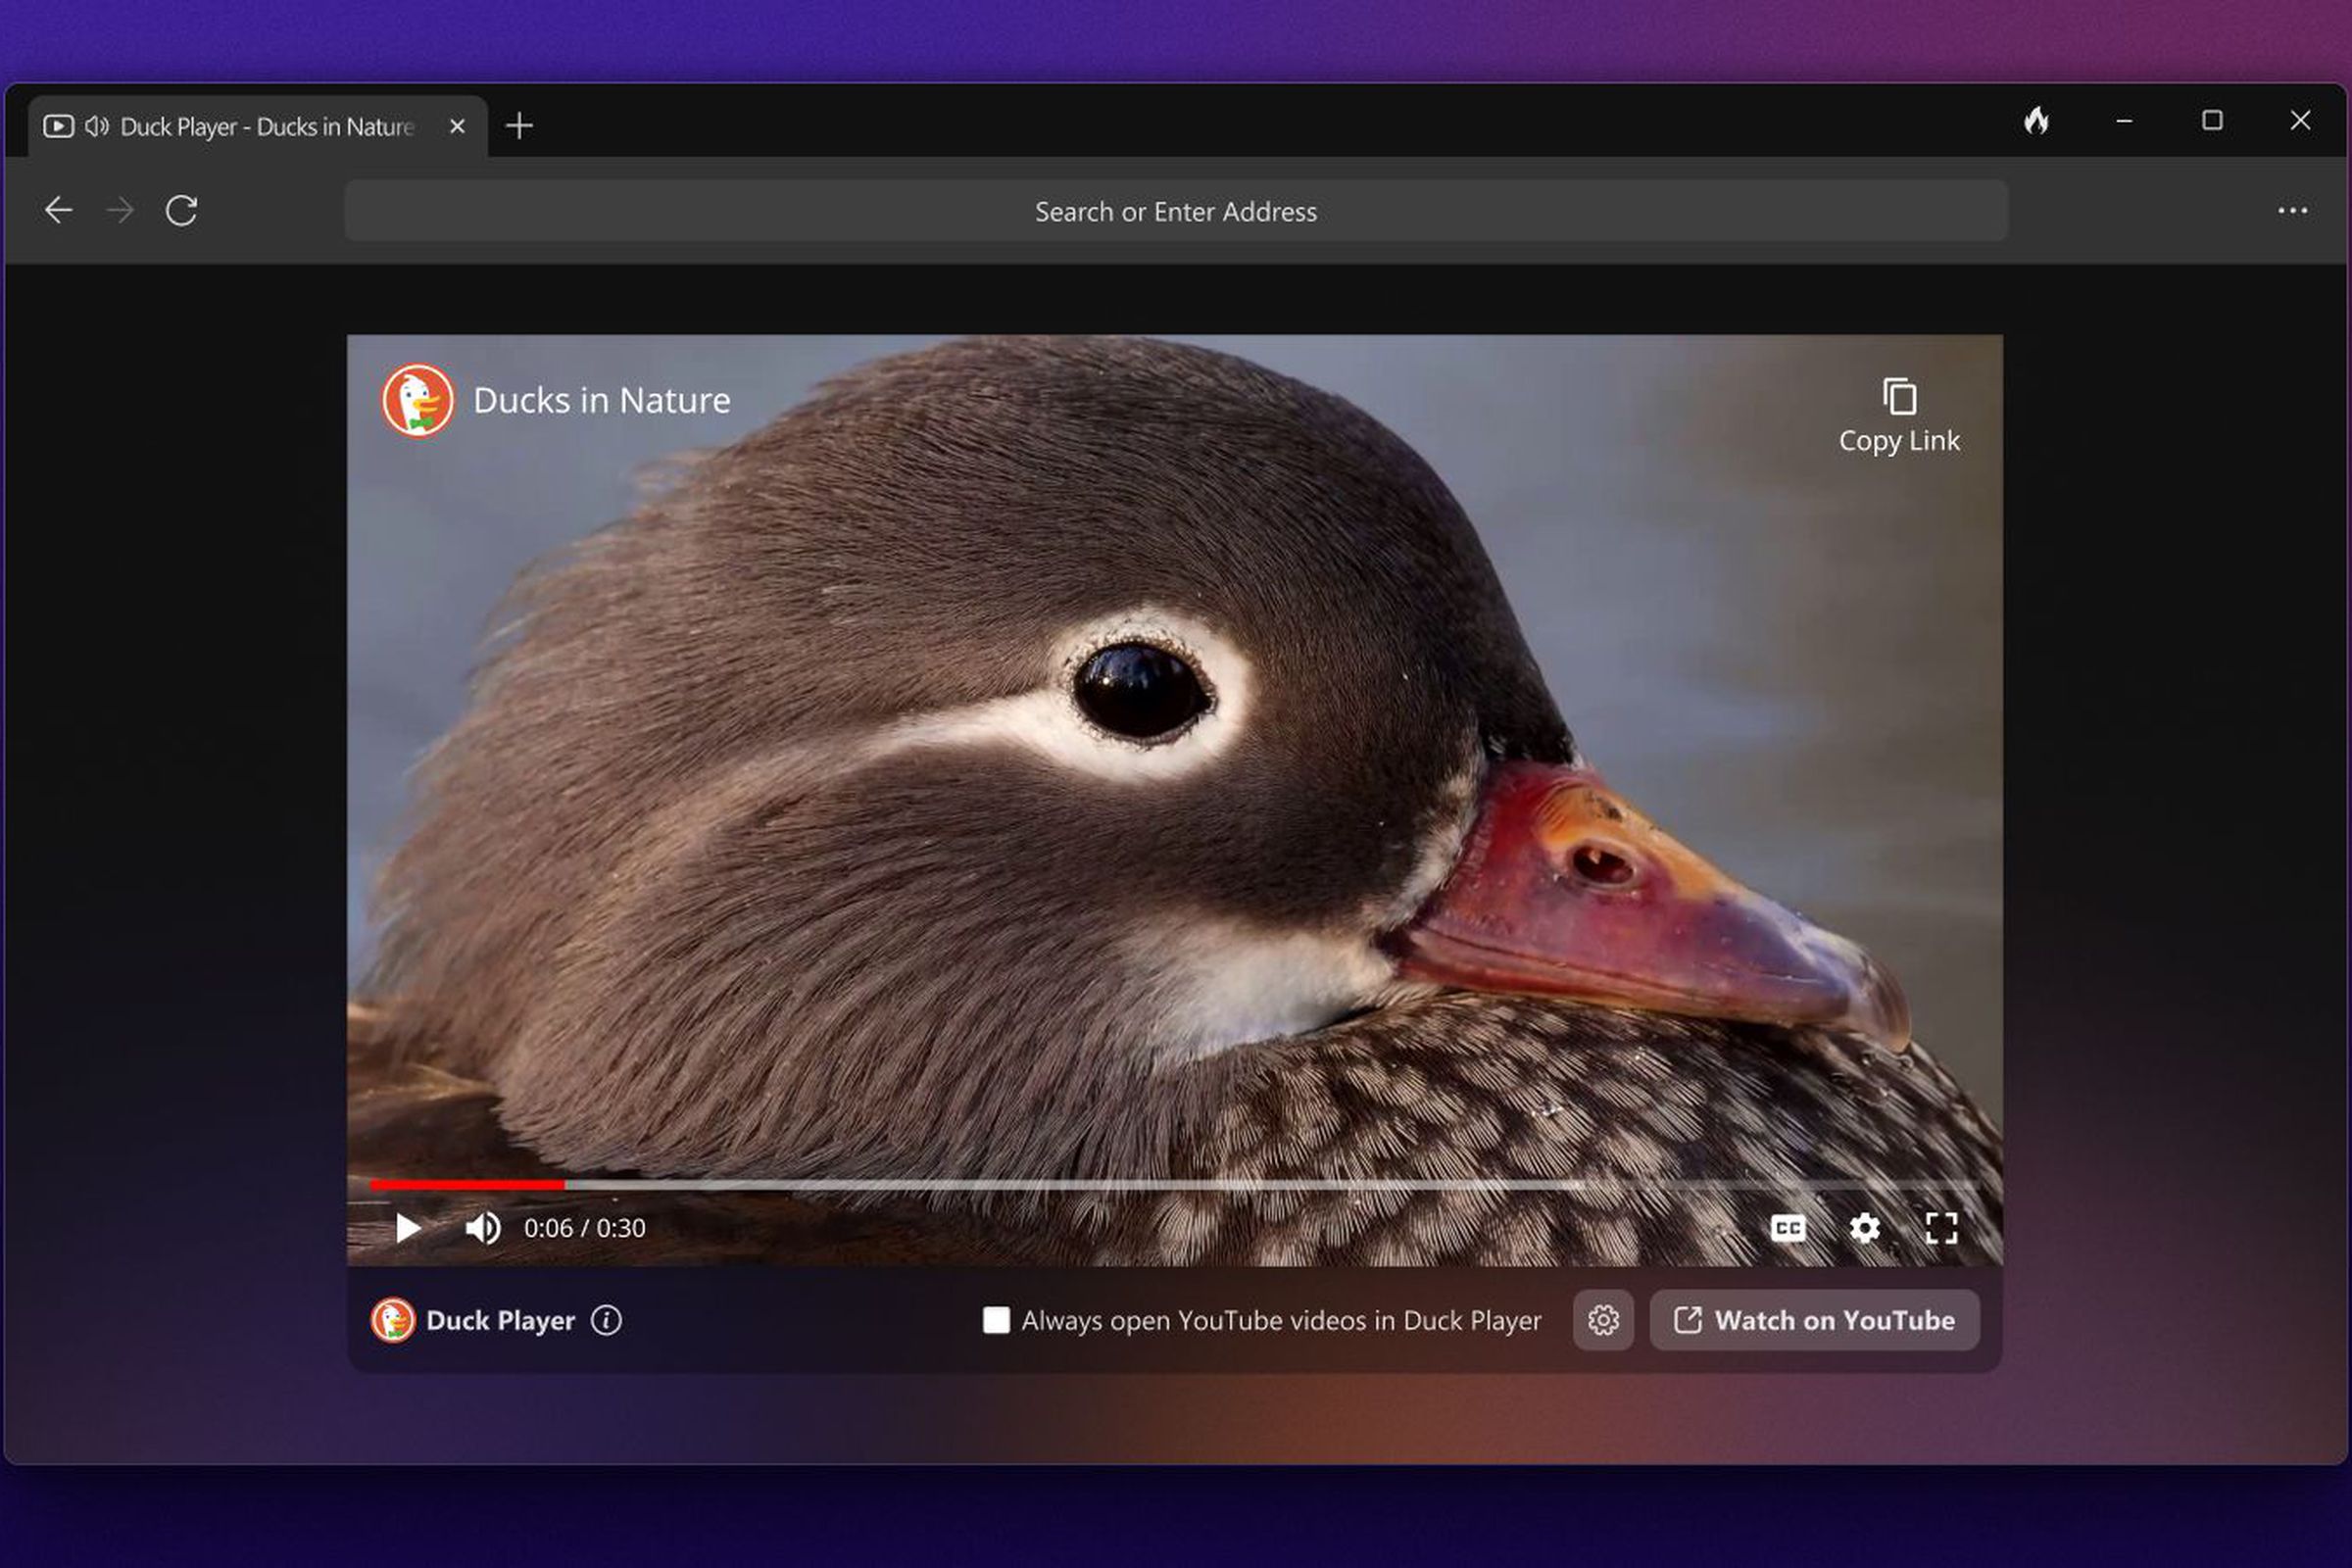 duckduckgo browser download for pc windows 11